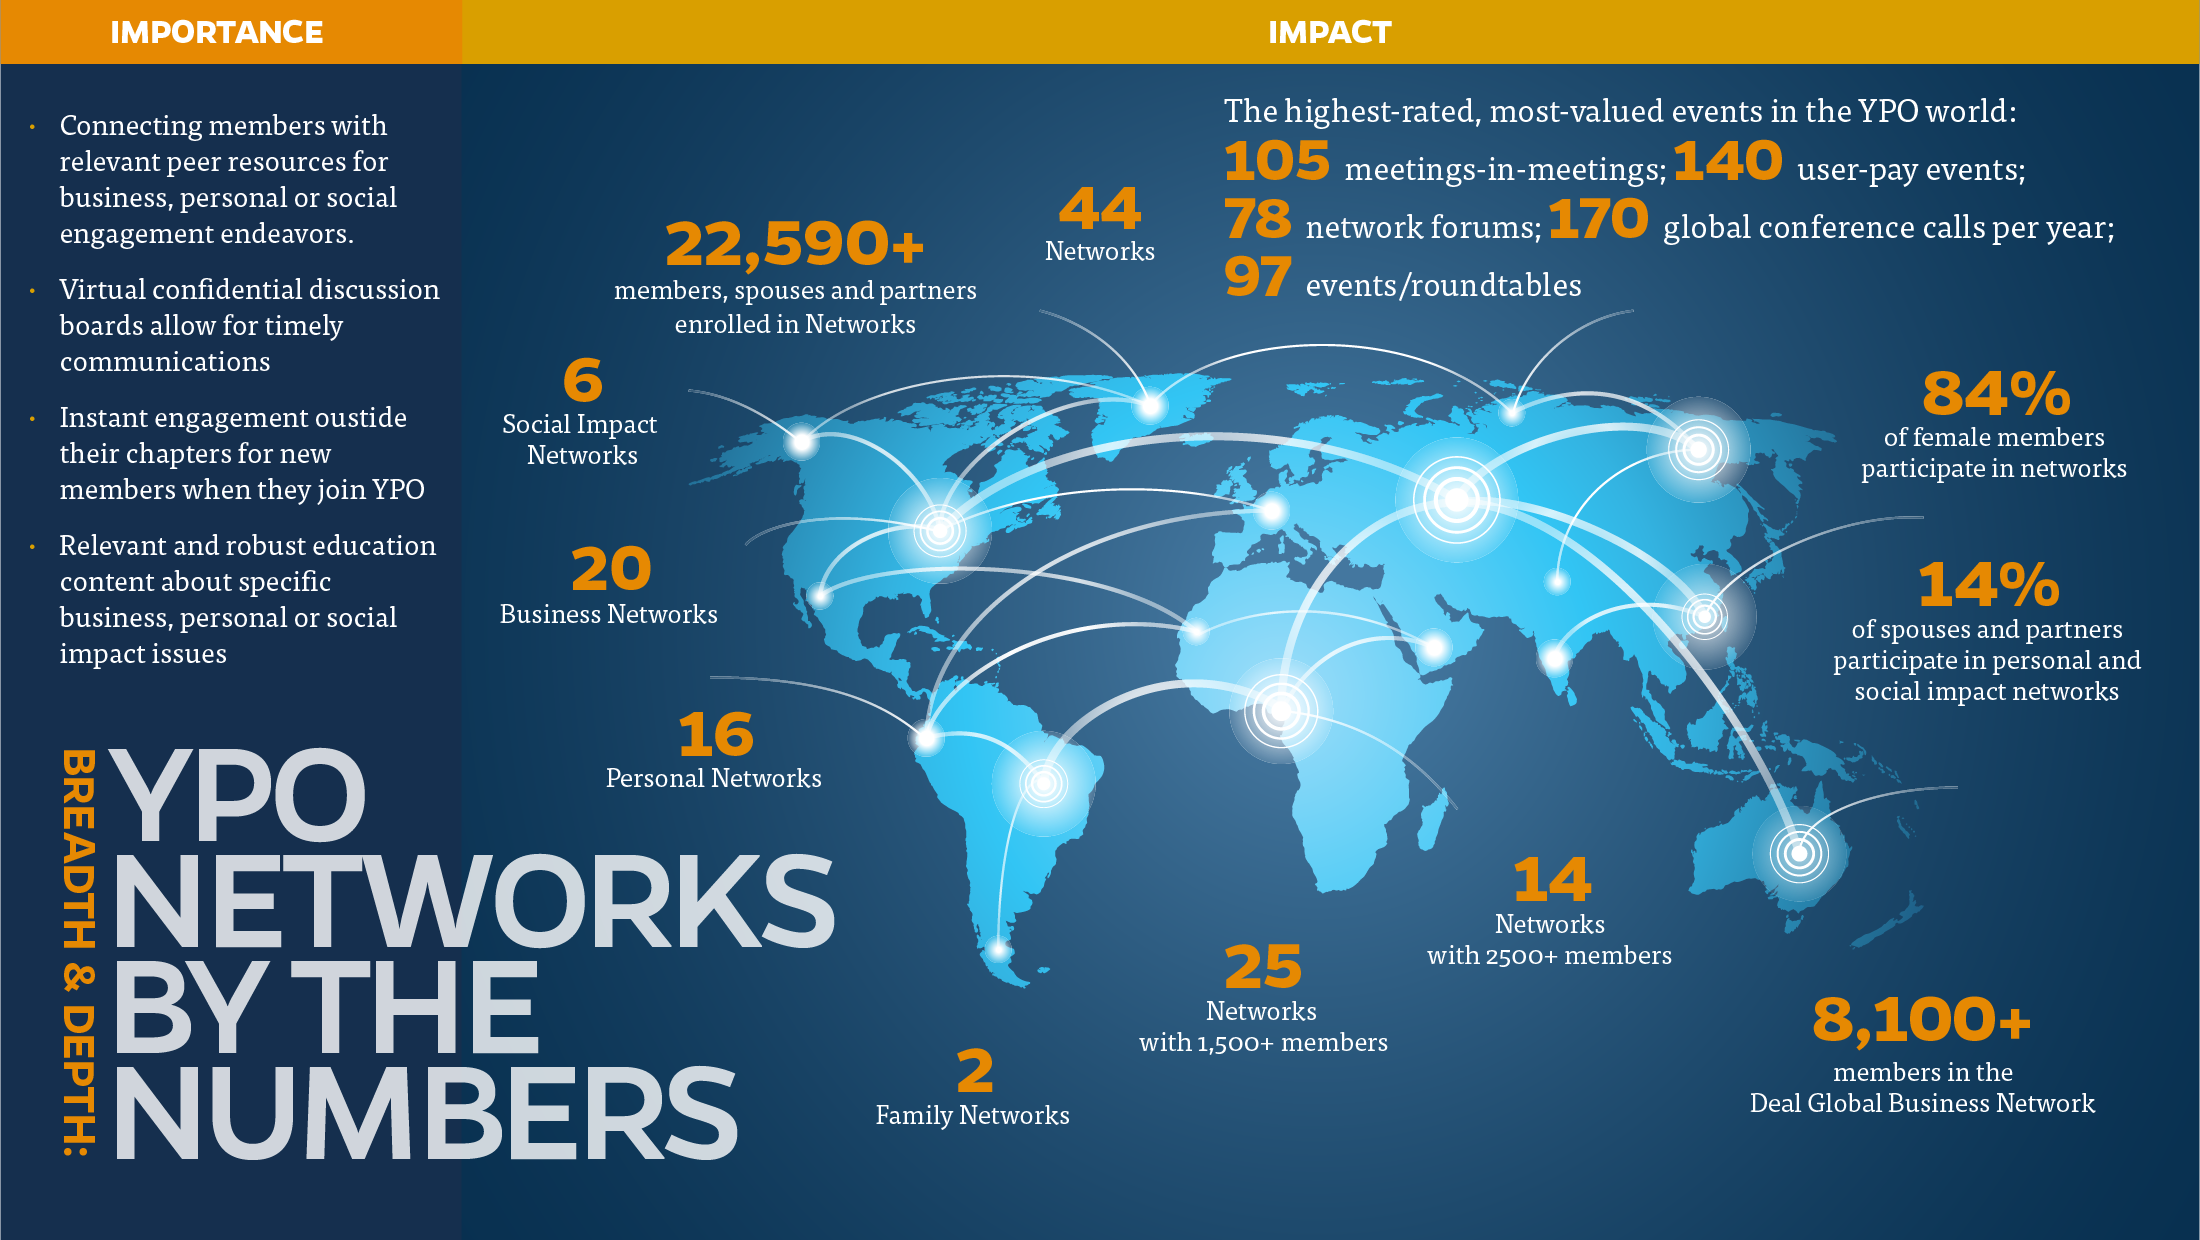 YPO Networks by the Numbers